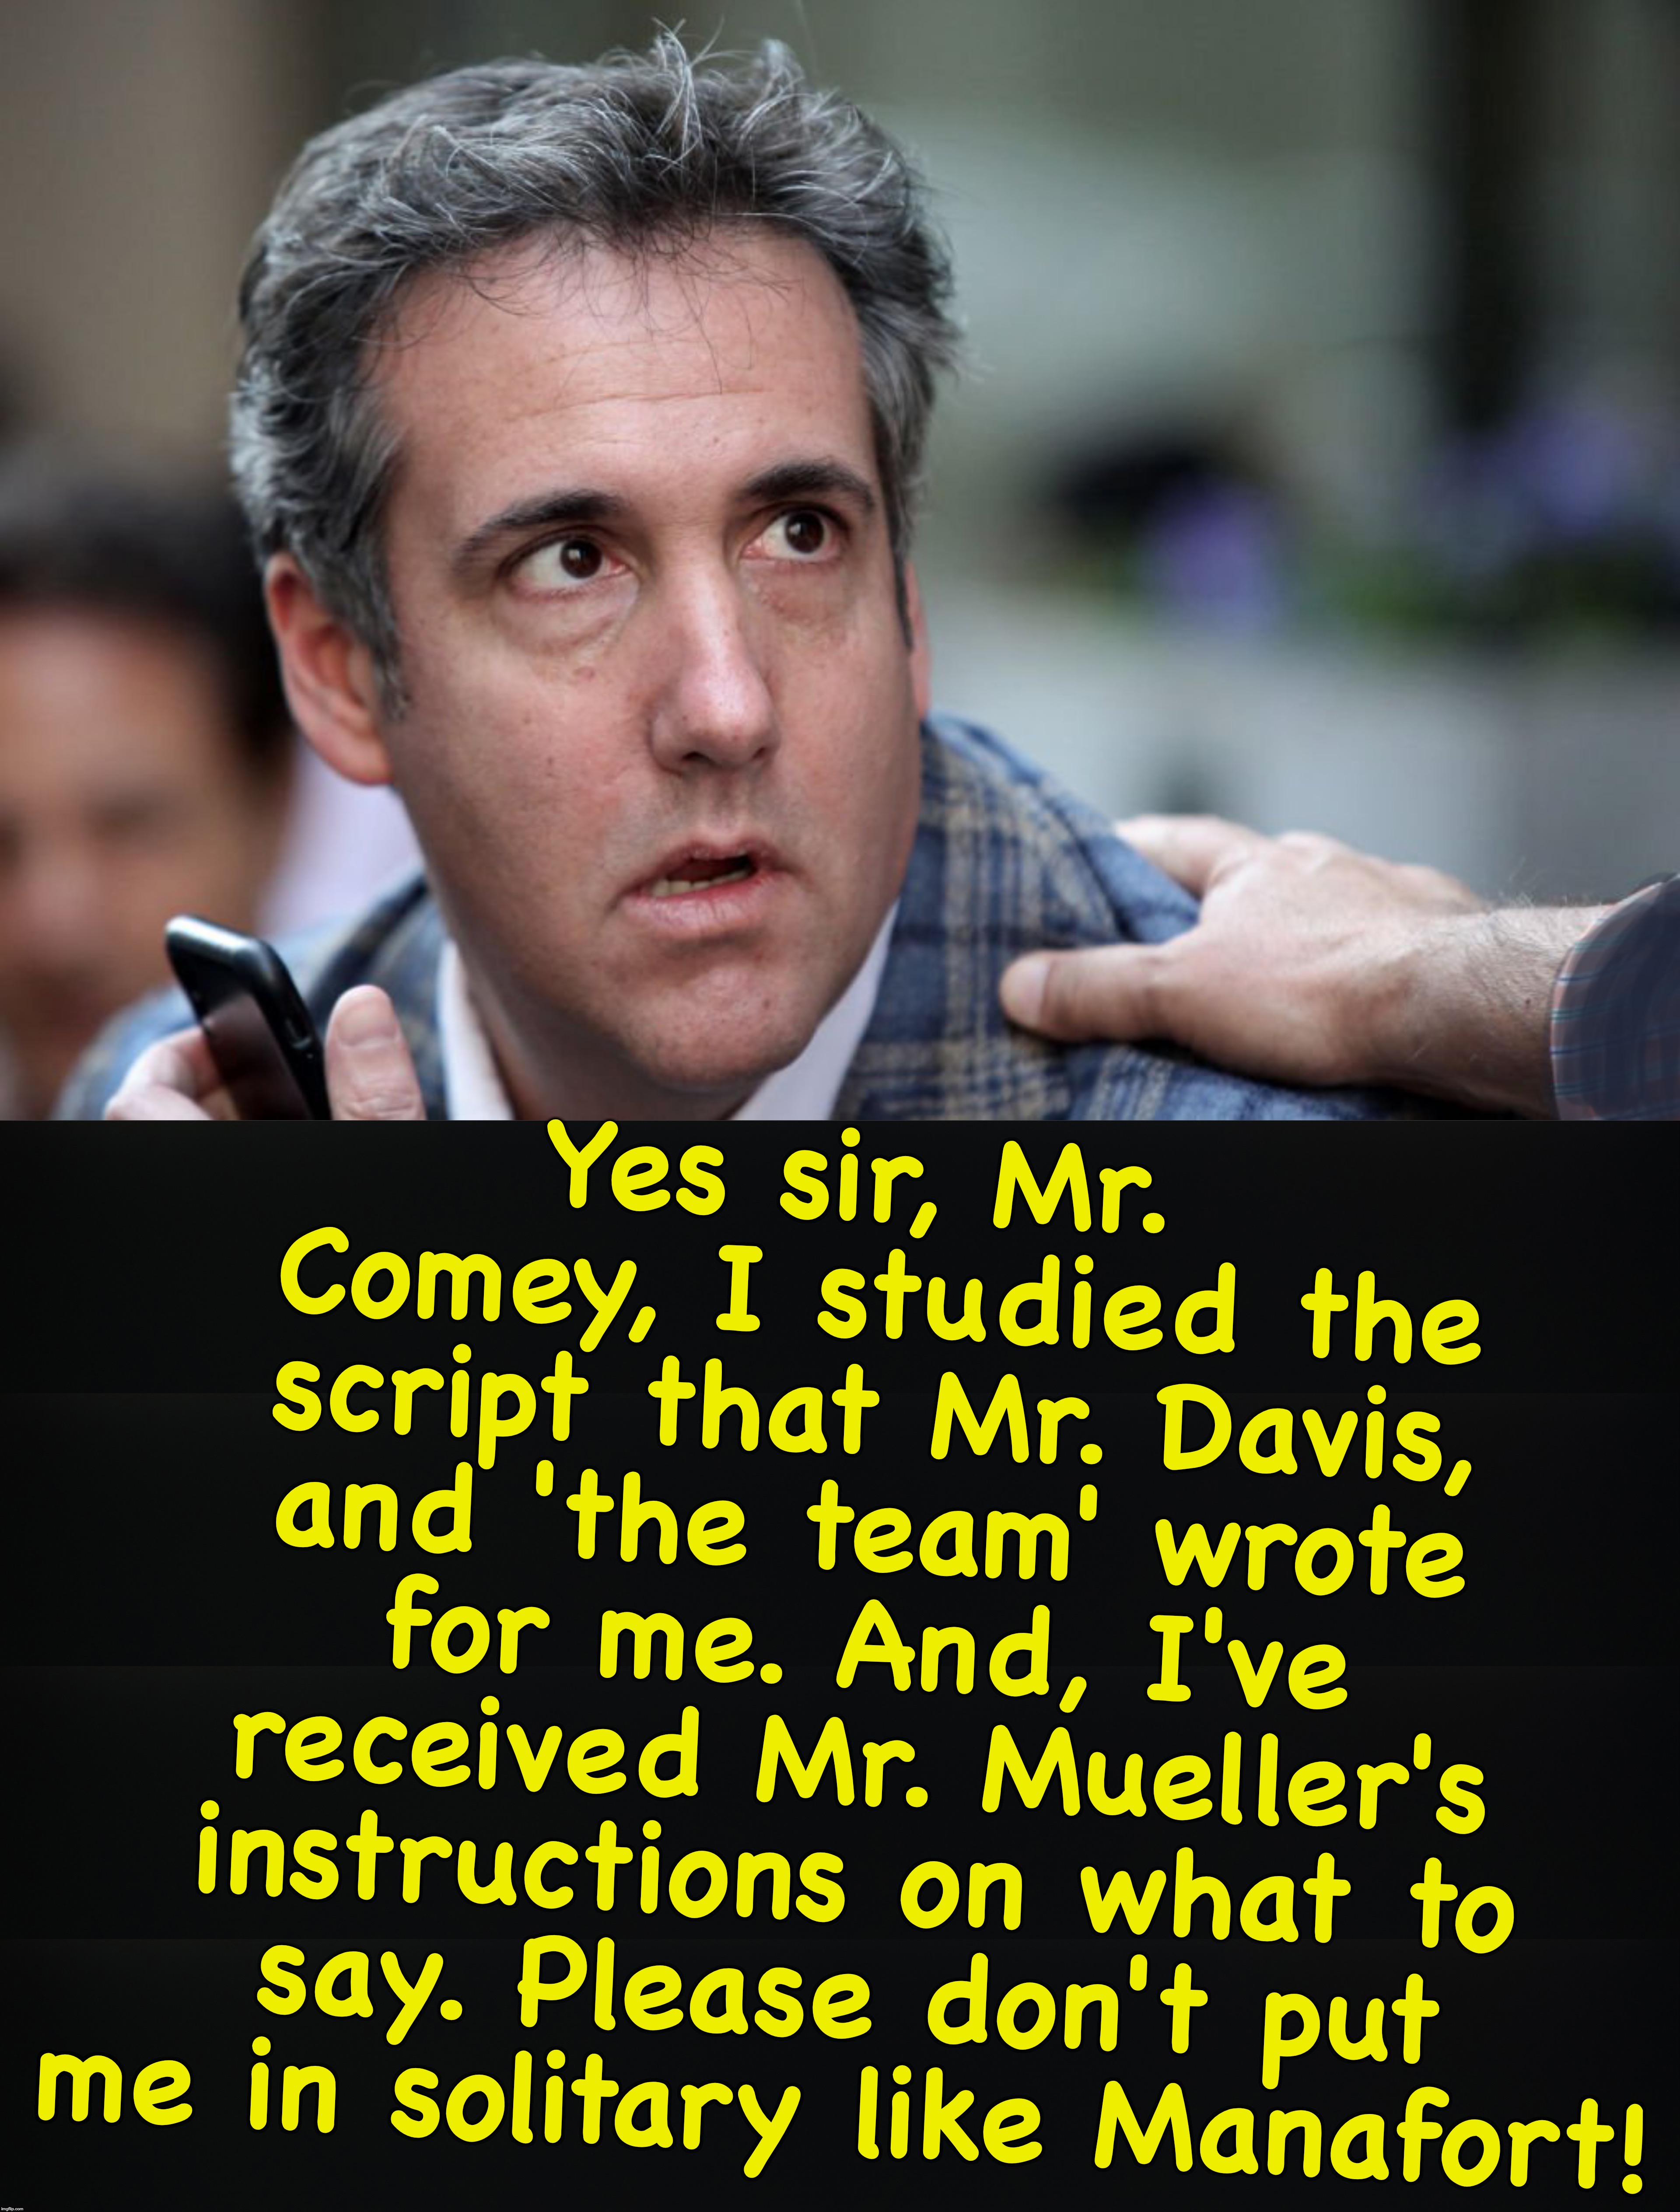 it likely went something like this.... | Yes sir, Mr. Comey, I studied the script that Mr. Davis, and 'the team' wrote for me. And, I've received Mr. Mueller's instructions on what to say. Please don't put me in solitary like Manafort! | image tagged in michael cohen | made w/ Imgflip meme maker